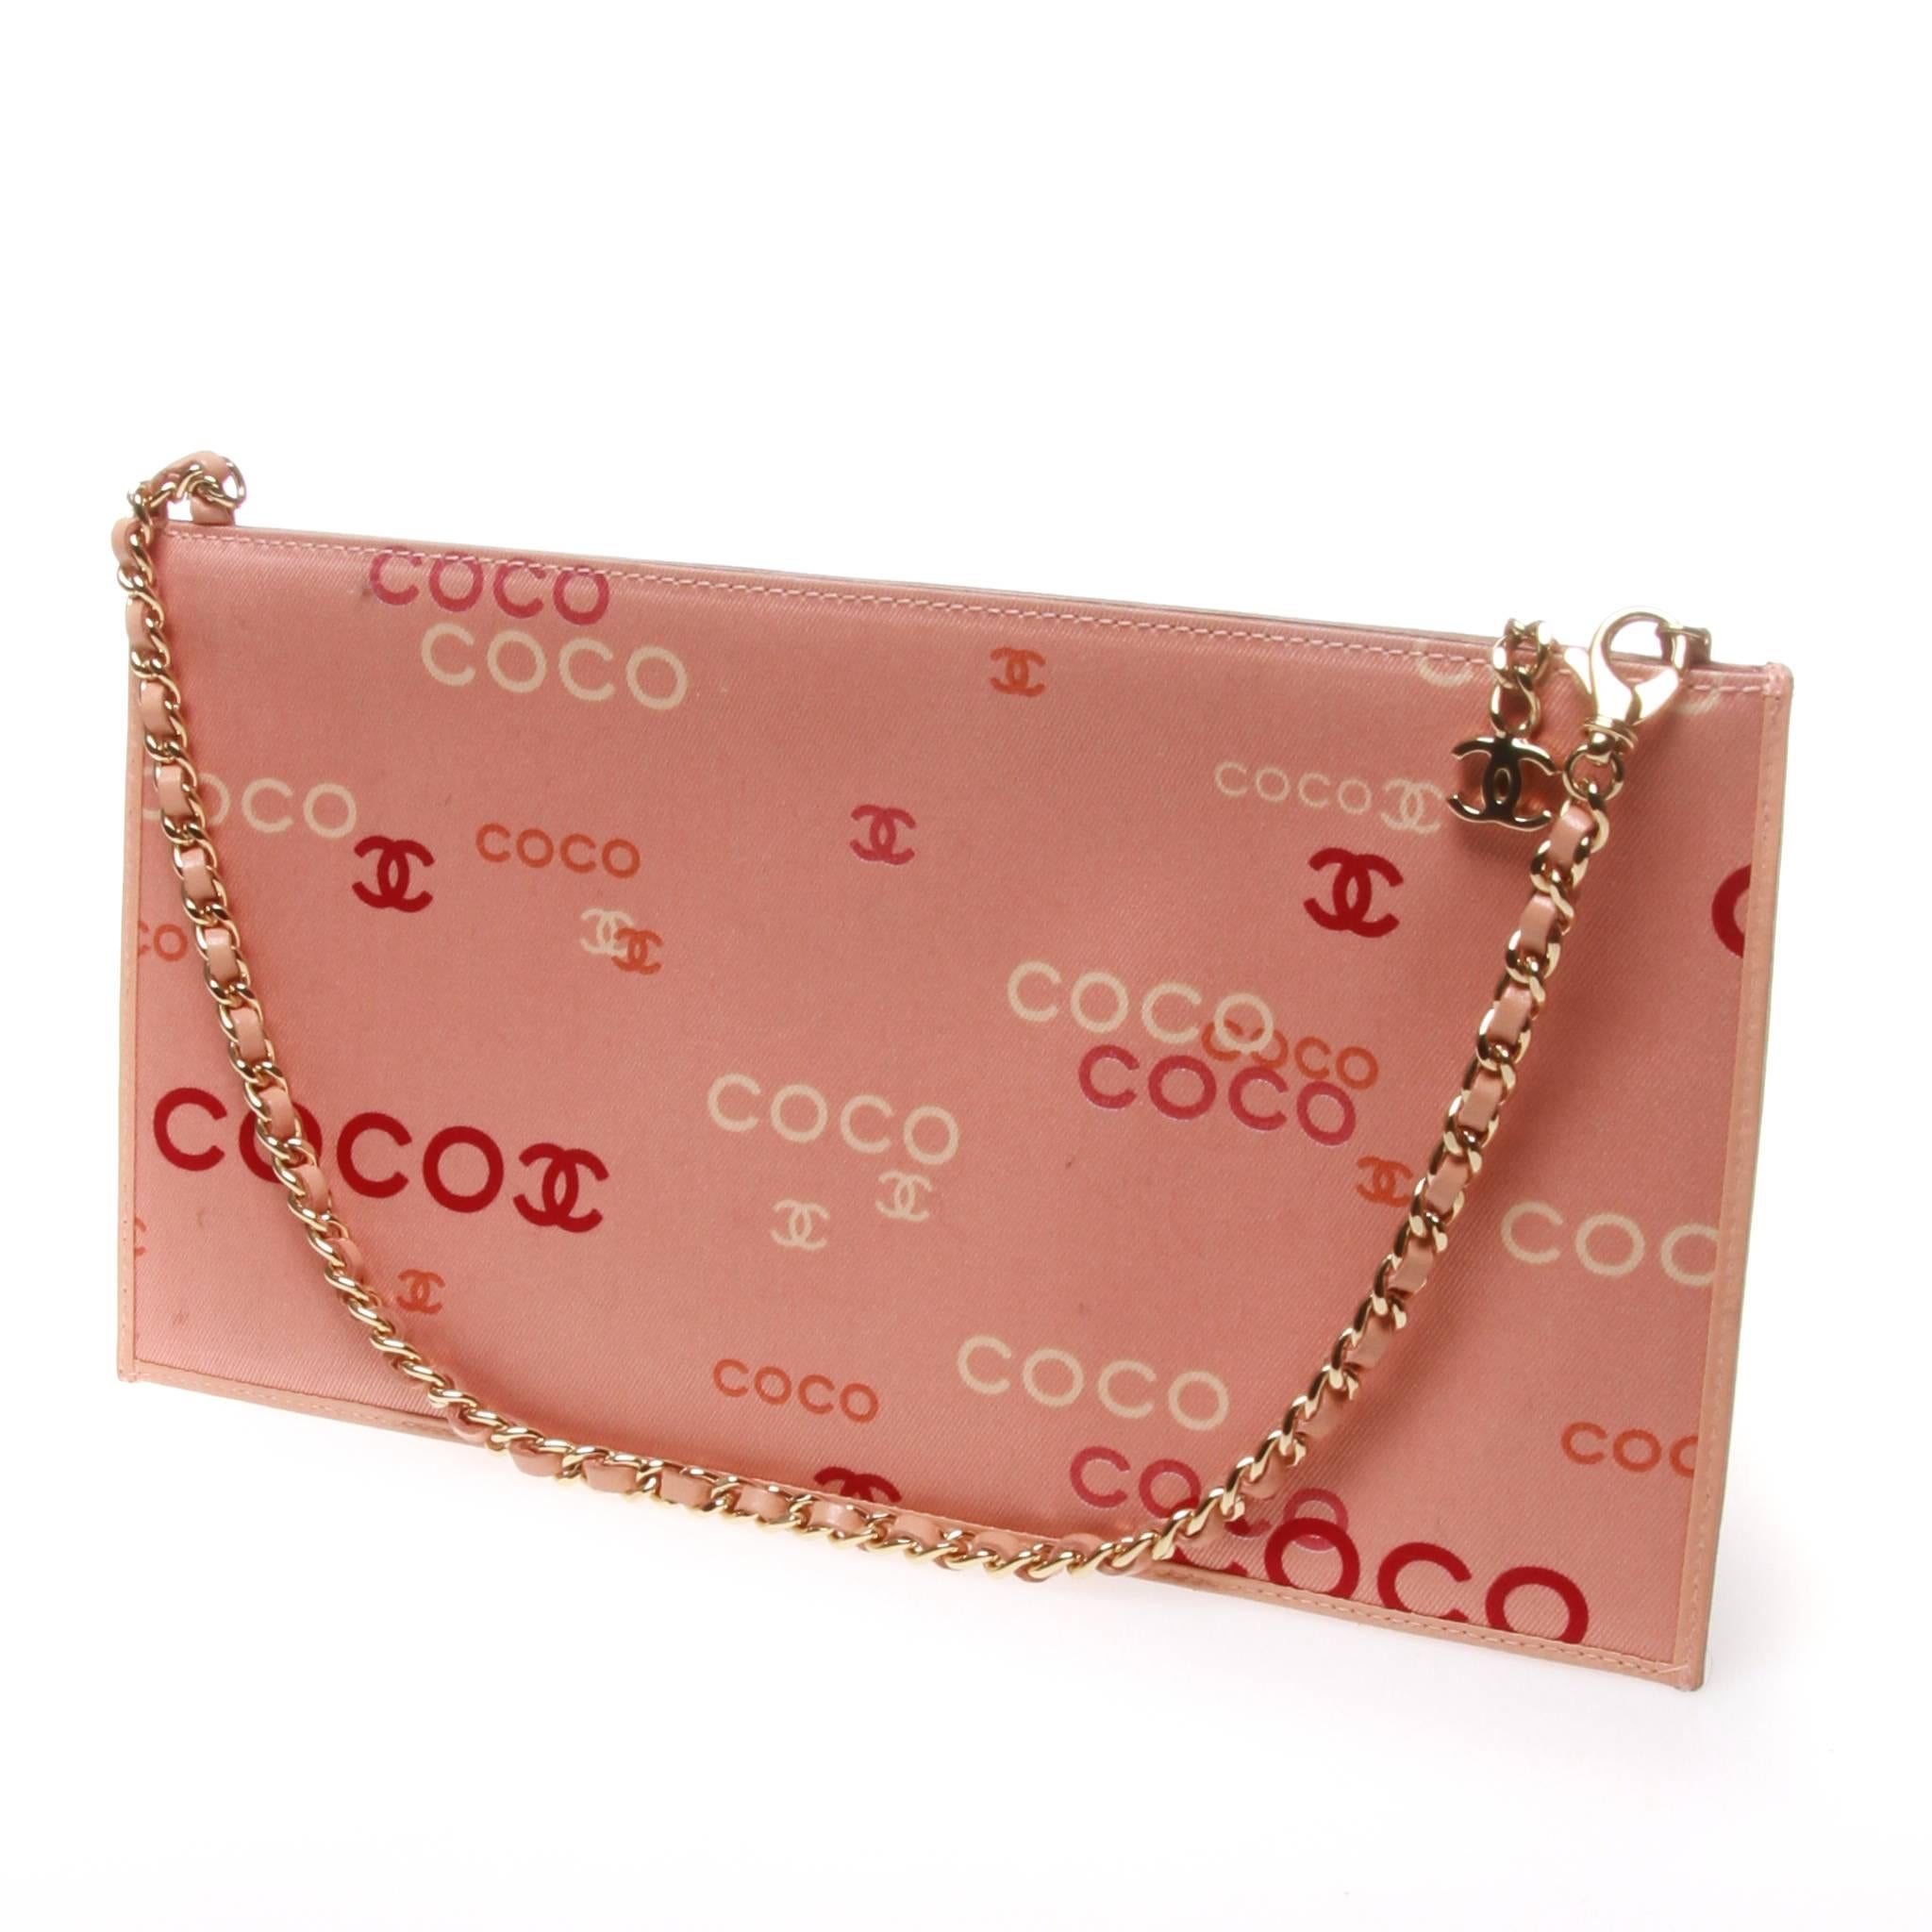 Chanel envelope pouch with coco graphic. The baby pink flat pouch features a pale lining and lambskin detailing. Gold tone classic Chanel chain woven with matching leather. A lobster claw clip to one end of the chain allows the bag to be worn as a